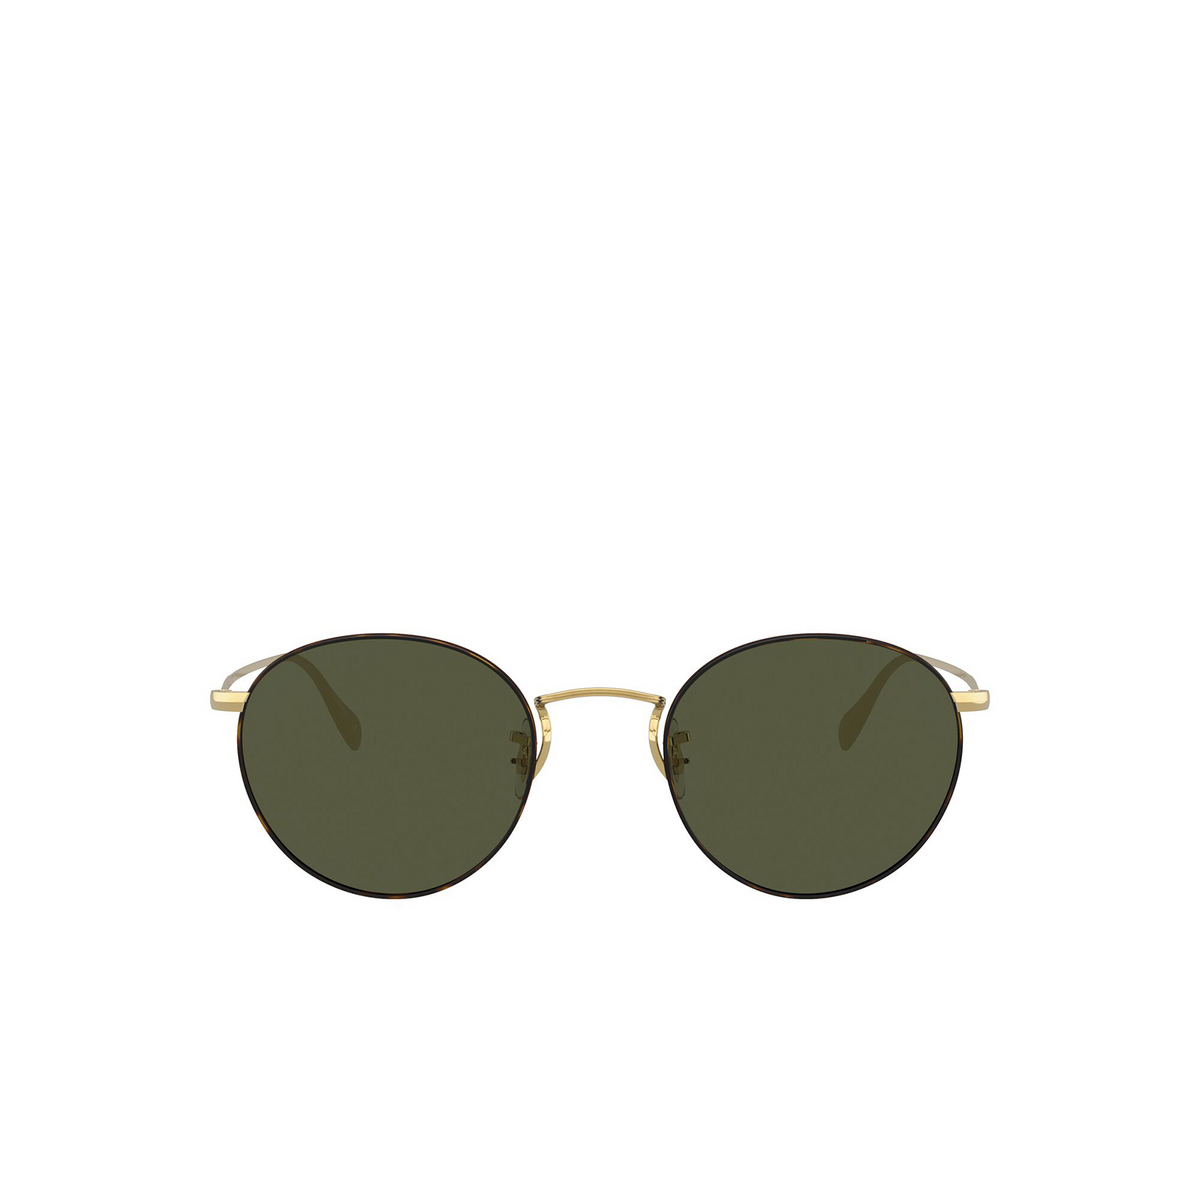 Oliver Peoples COLERIDGE Sunglasses 530552 Gold / Tortoise - front view